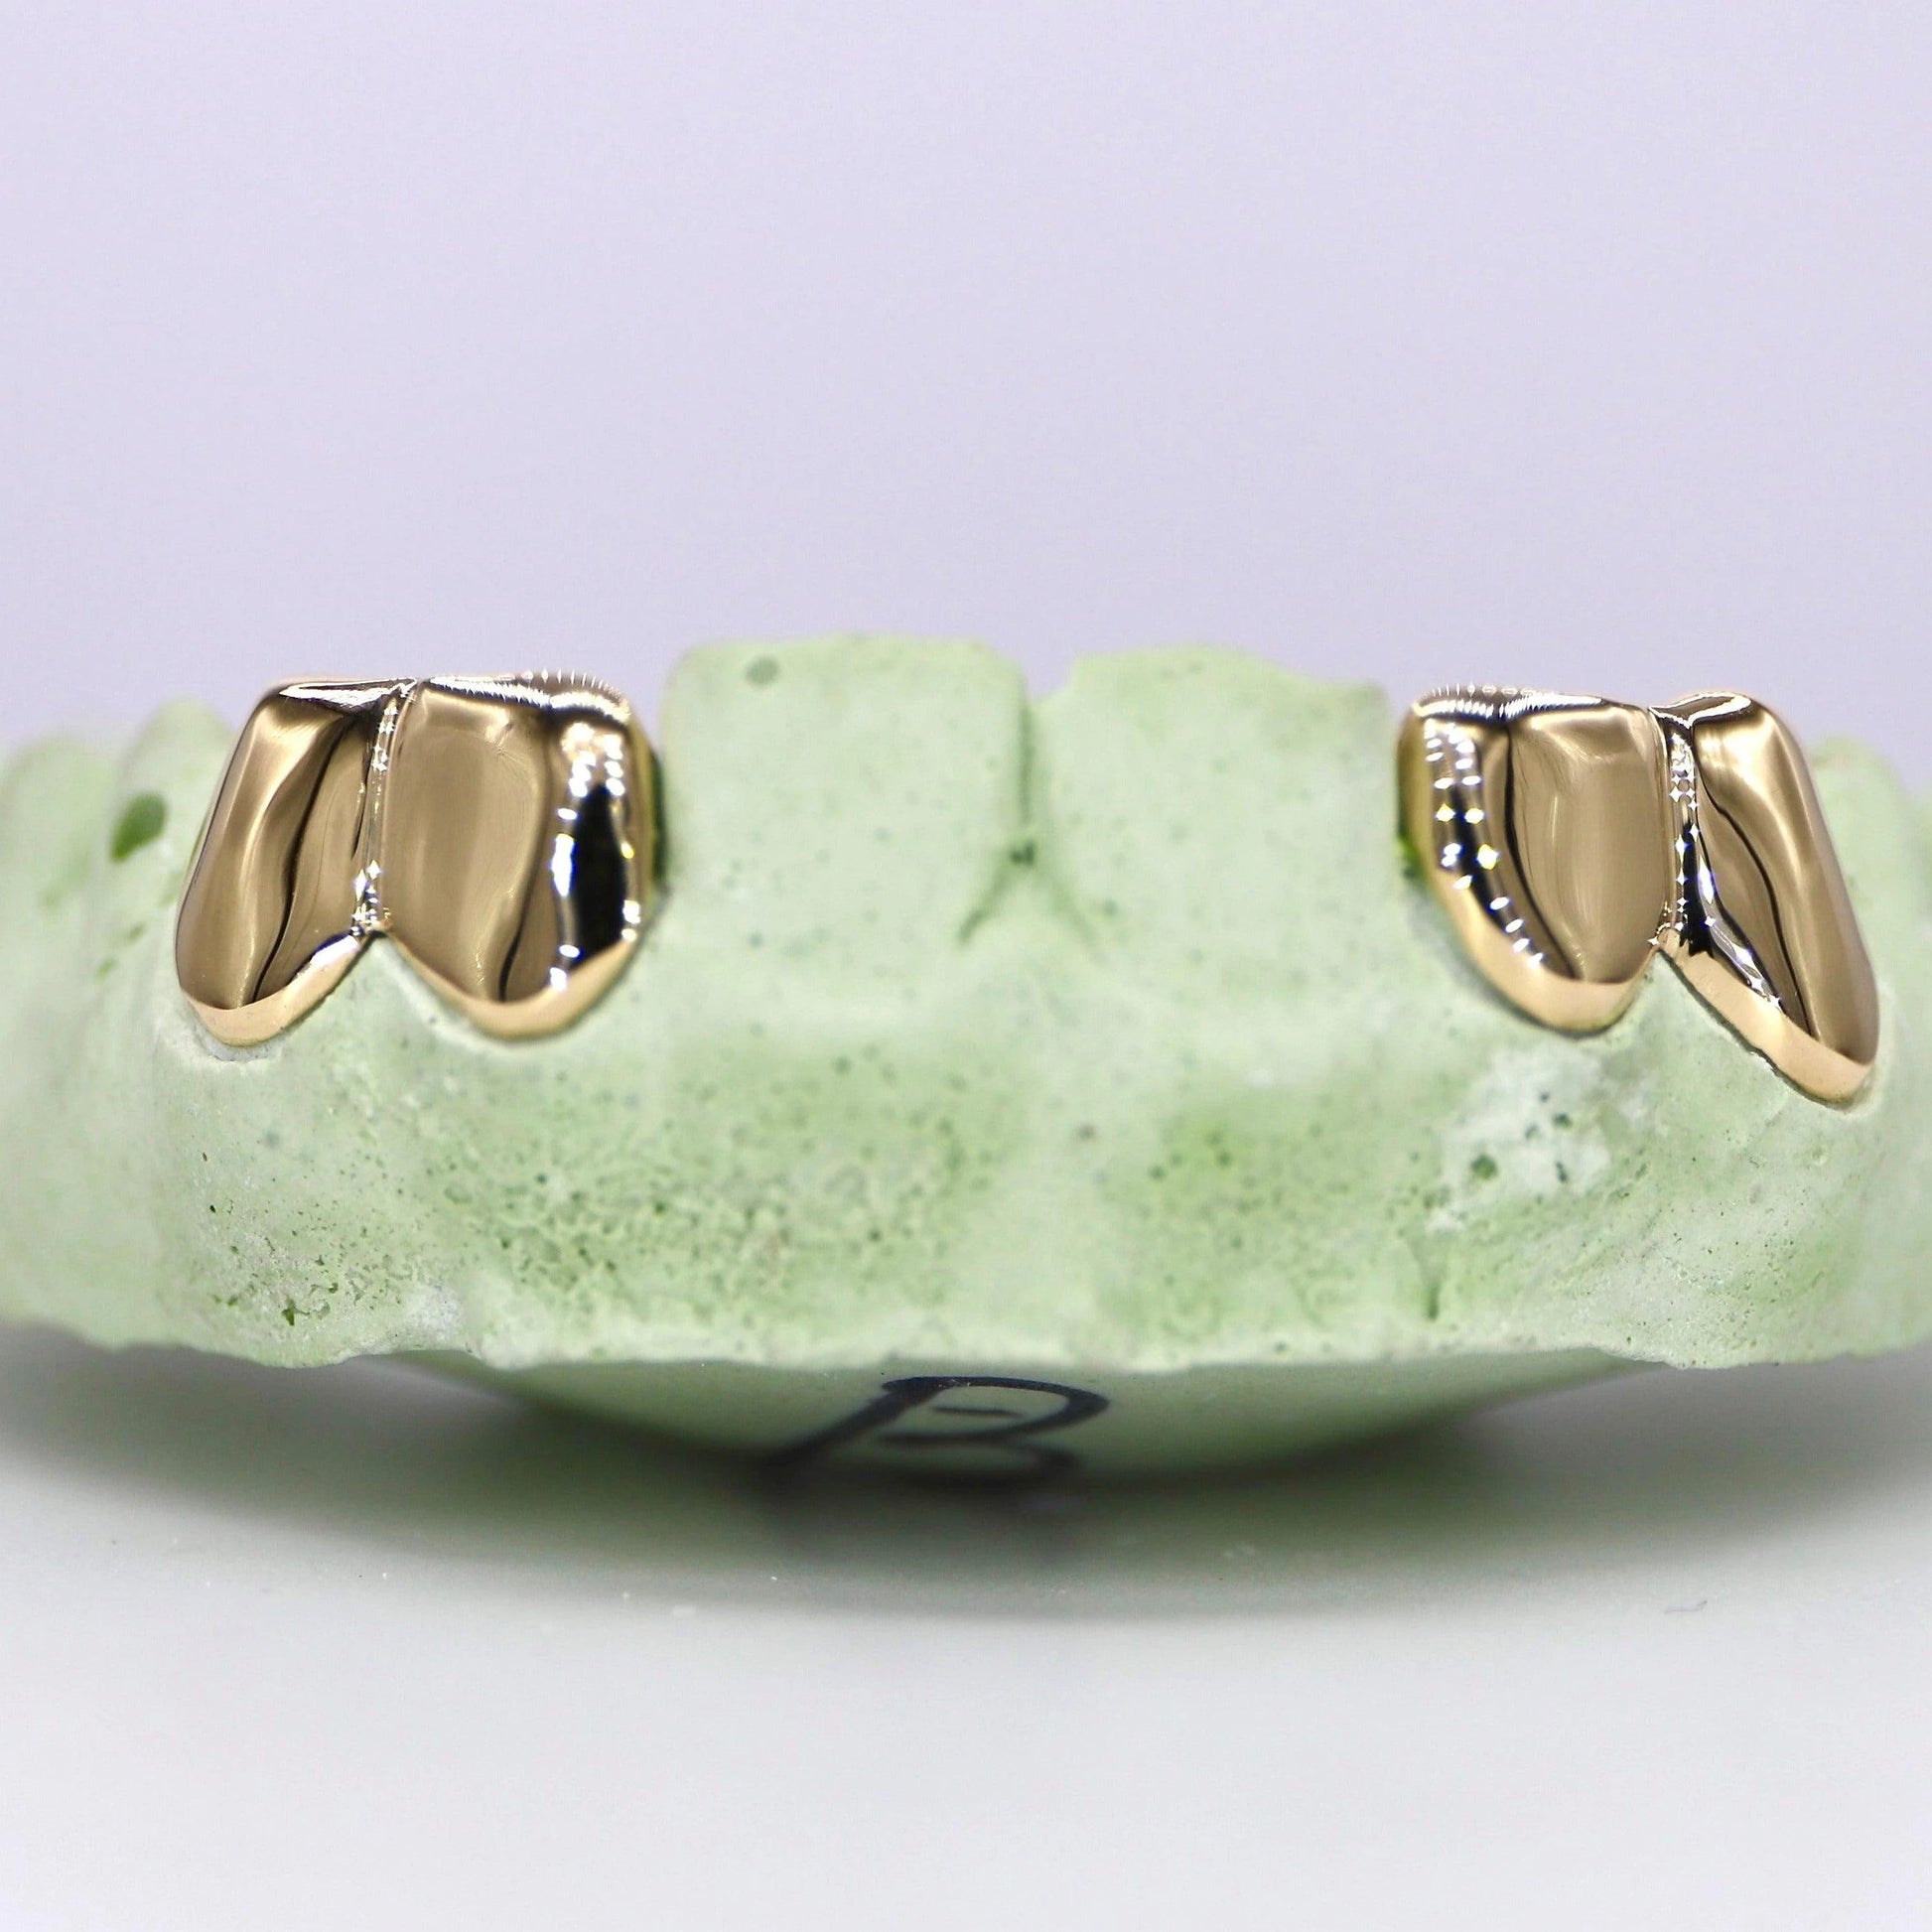 Custom Grillz Appointment - Water ATL